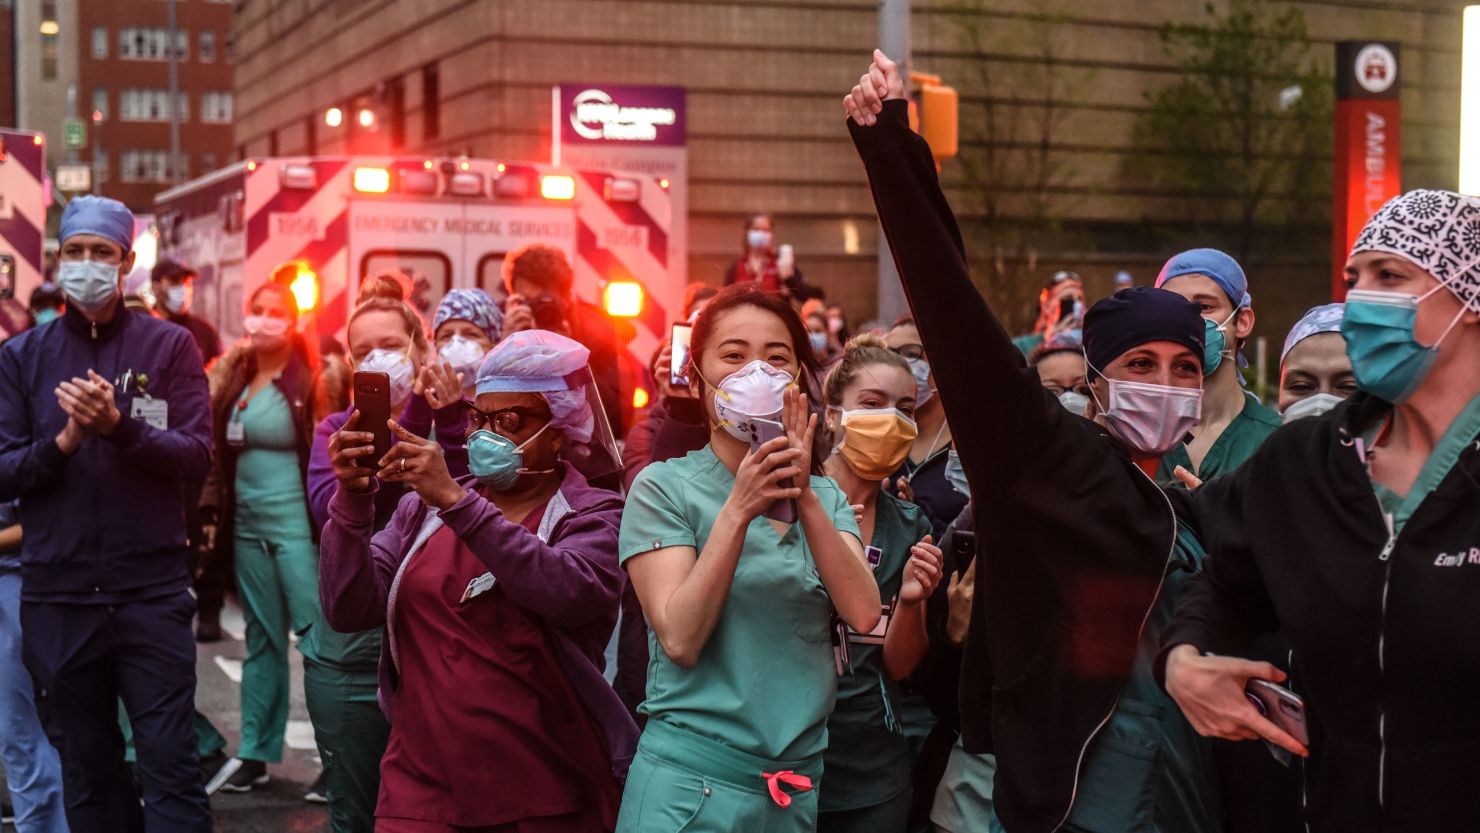 Nurses react as community members applaud them on Thursday, April 30, at NYU Langone Hospital in New York. Every night at 7, medical workers take a break as the community shows their appreciation.